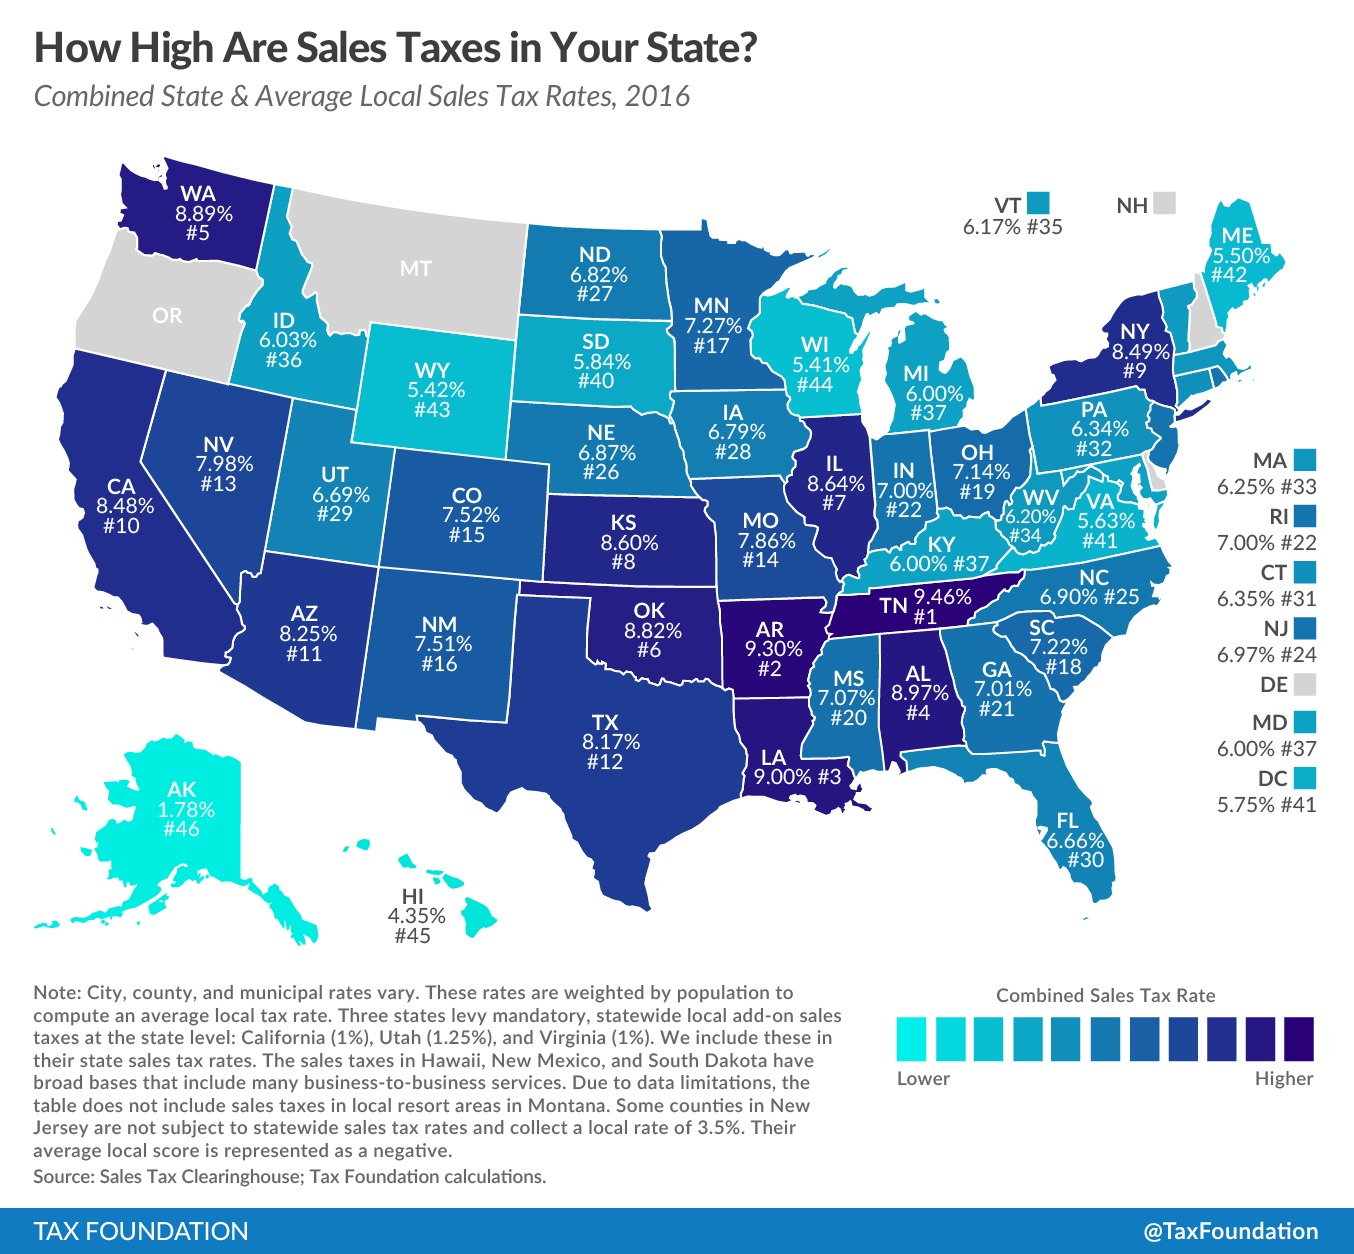 ouch-alabama-has-4th-highest-combined-sales-tax-rate-in-the-country-yellowhammer-news